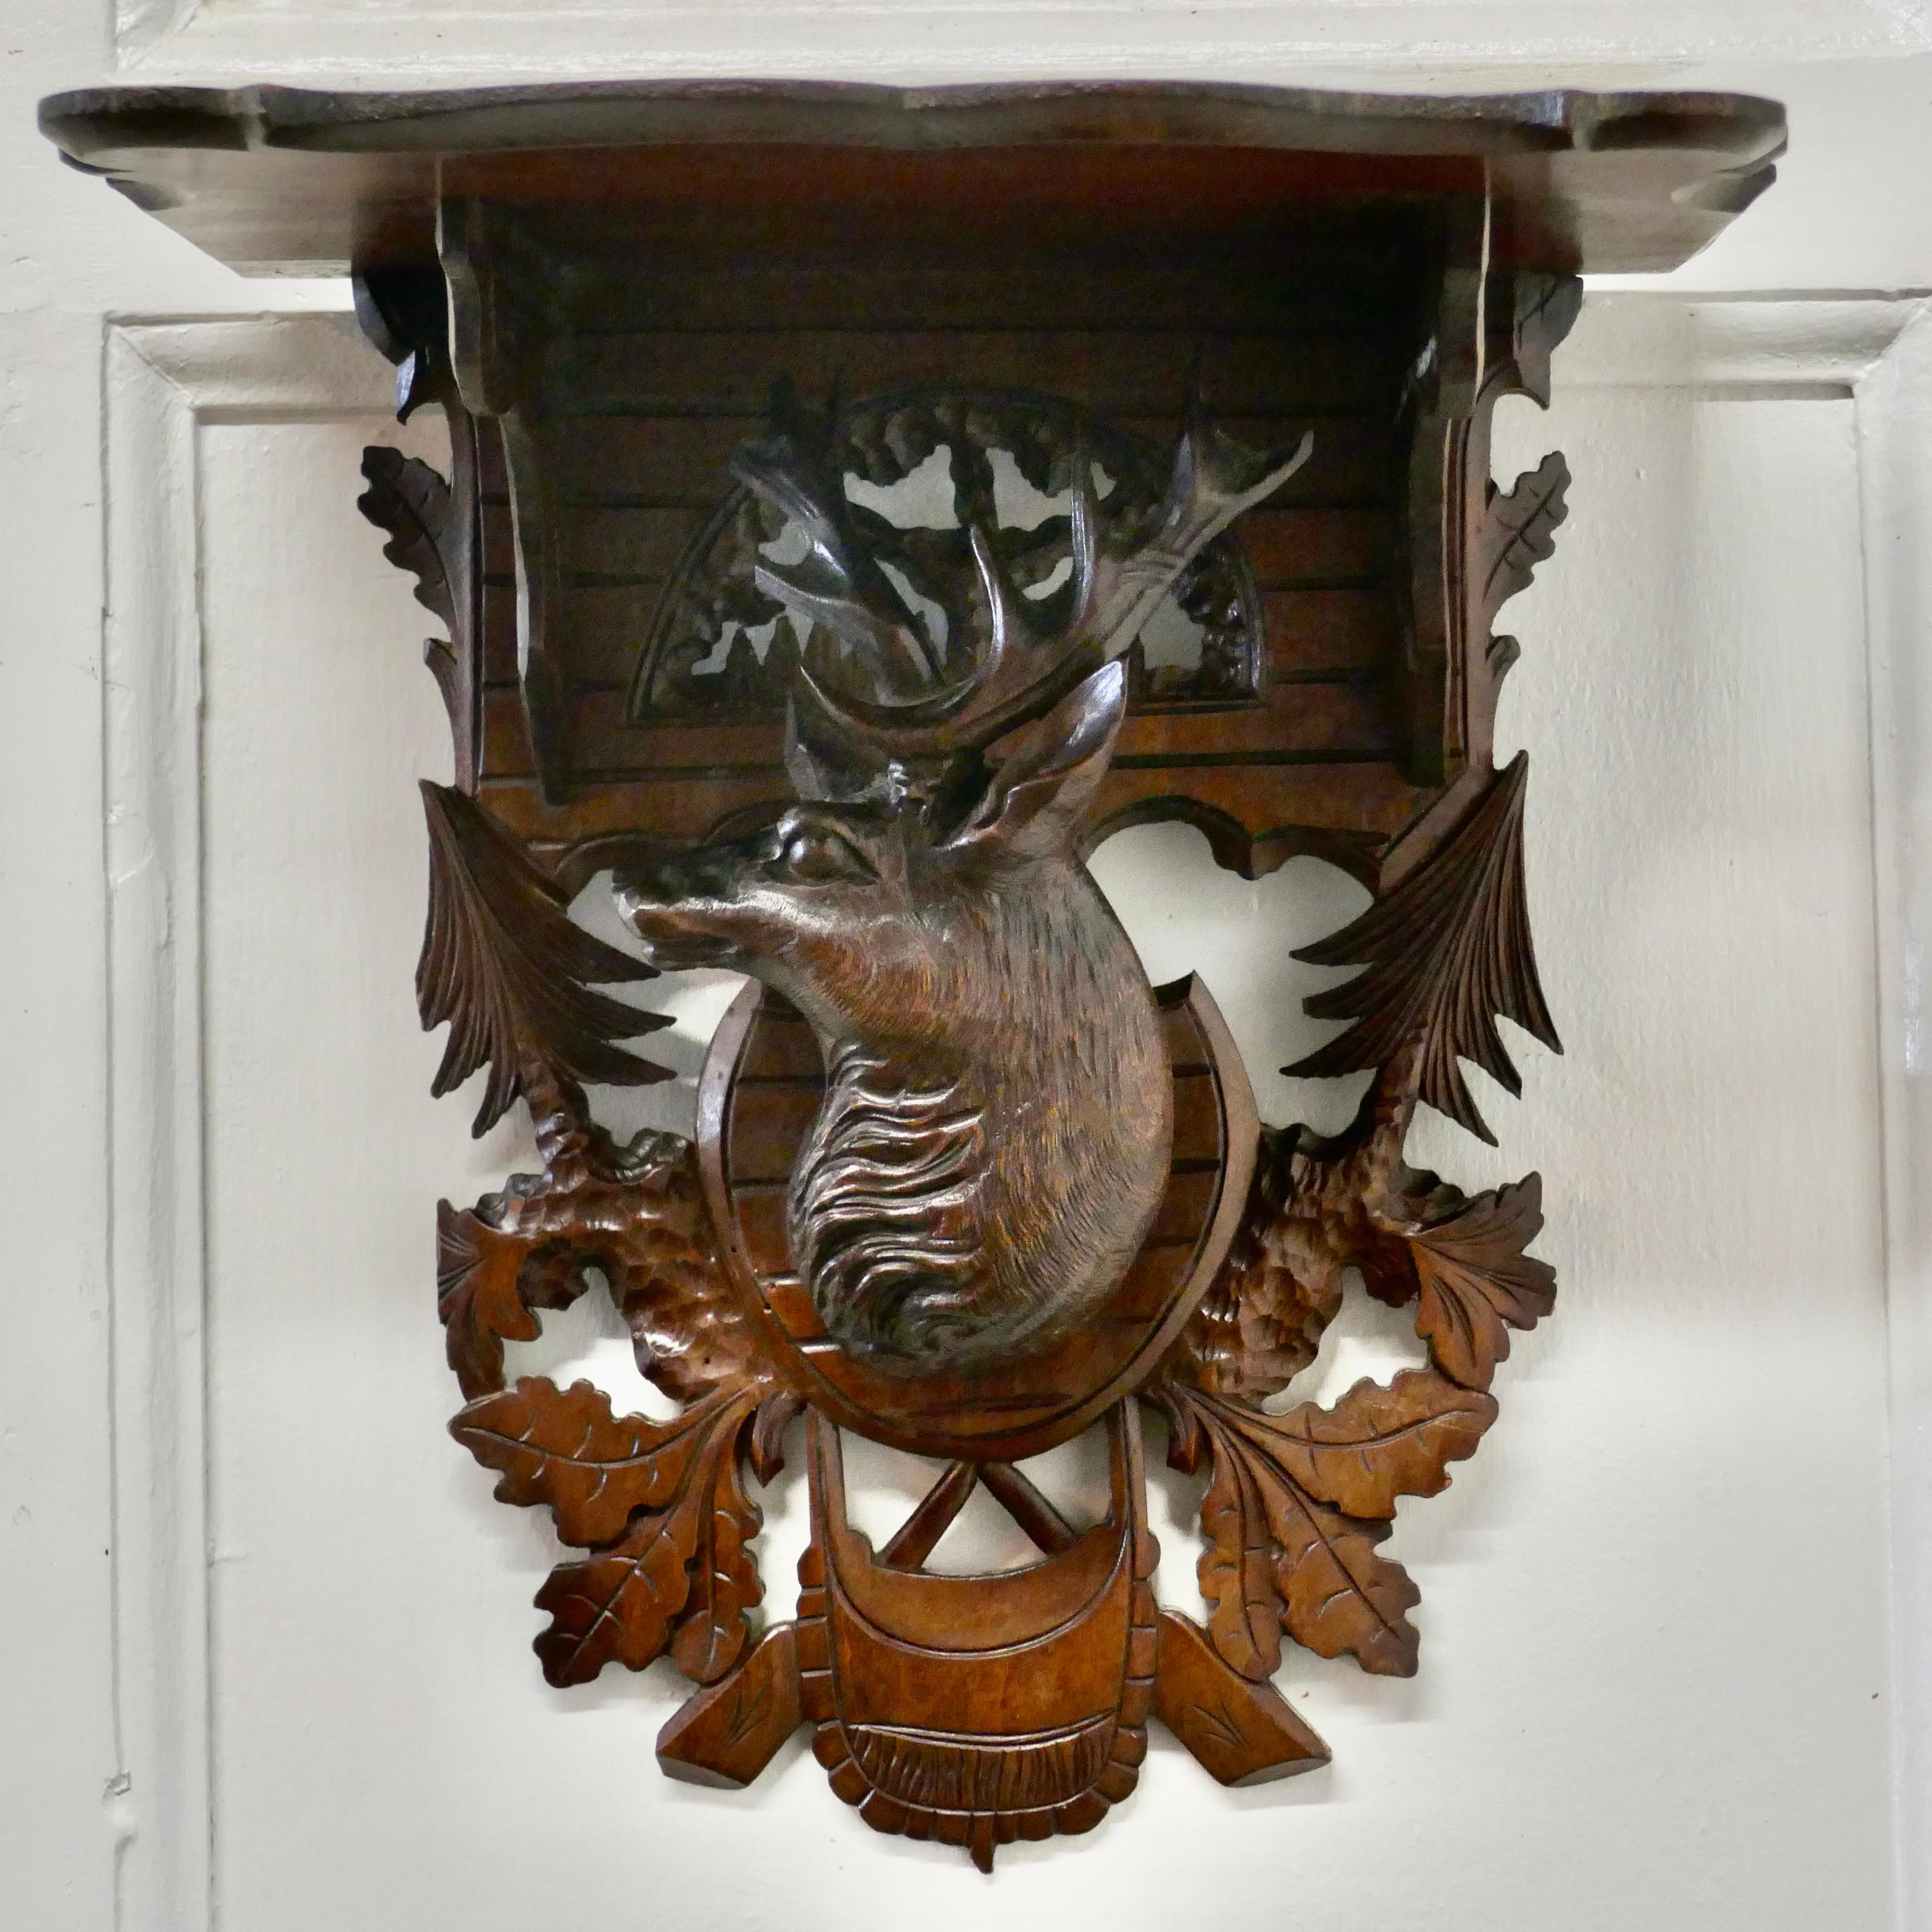 Black Forest style carved wall bracket shelf 

This is a delightful item, the bracket has a carved stag’s head decorated with leaves and trees from the forest supporting the shaped bracket shelf
Measures: It is 14” tall, 12” wide and 7”